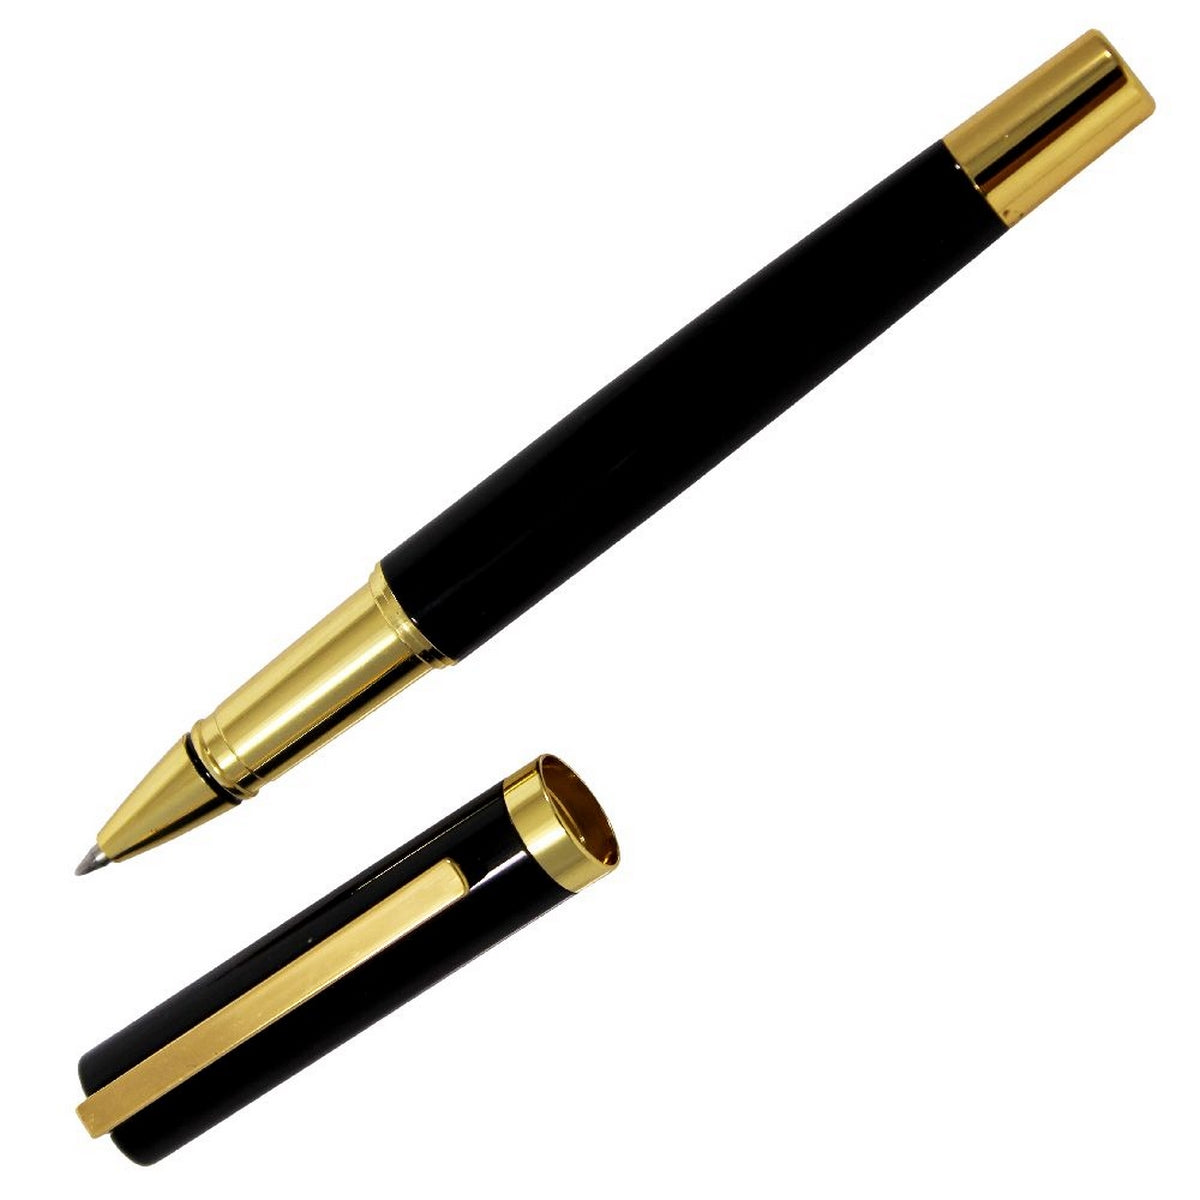 jags-mumbai Roller Pens Elevate Your Writing Experience with the Roller Pen Black Golden Clip Y02RPBKGC